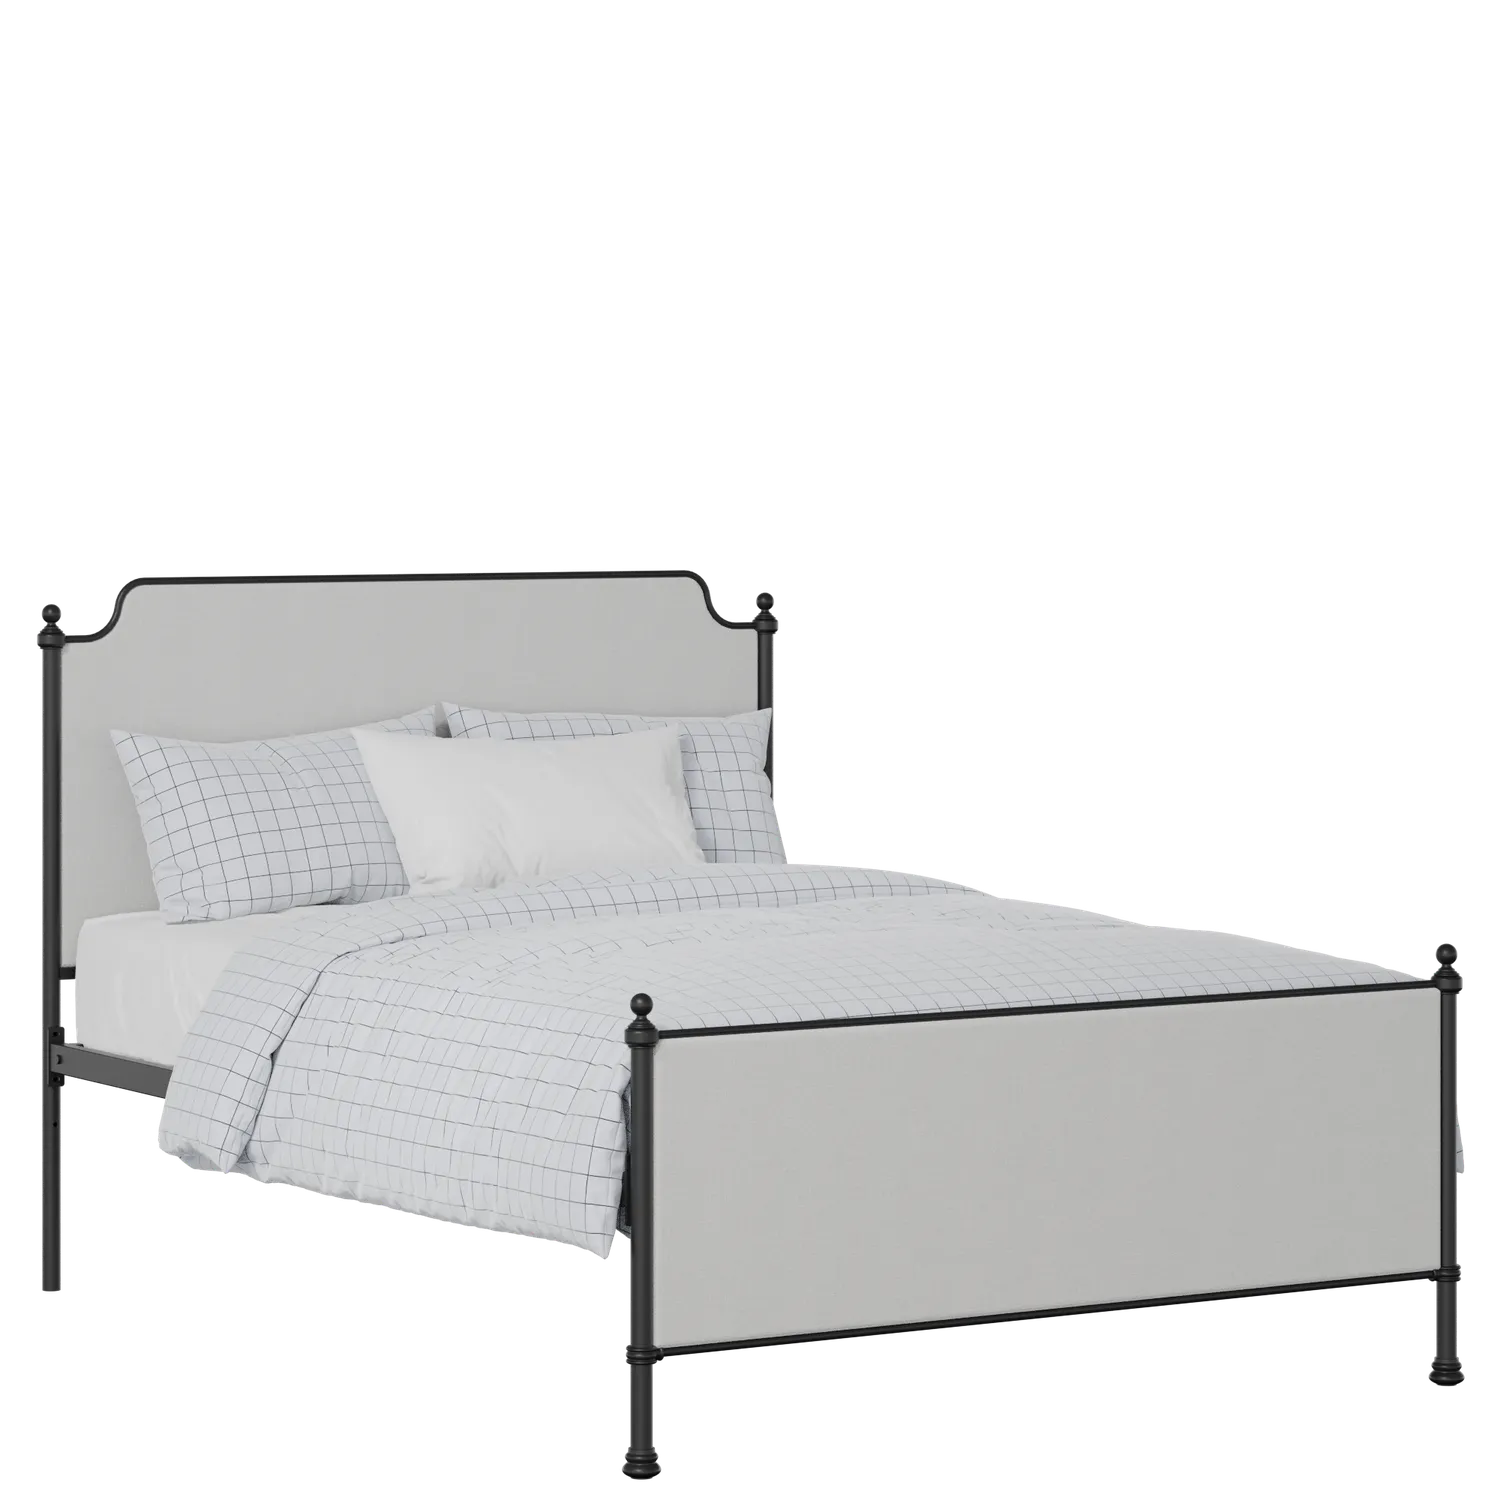 Miranda iron/metal upholstered bed in black with silver fabric